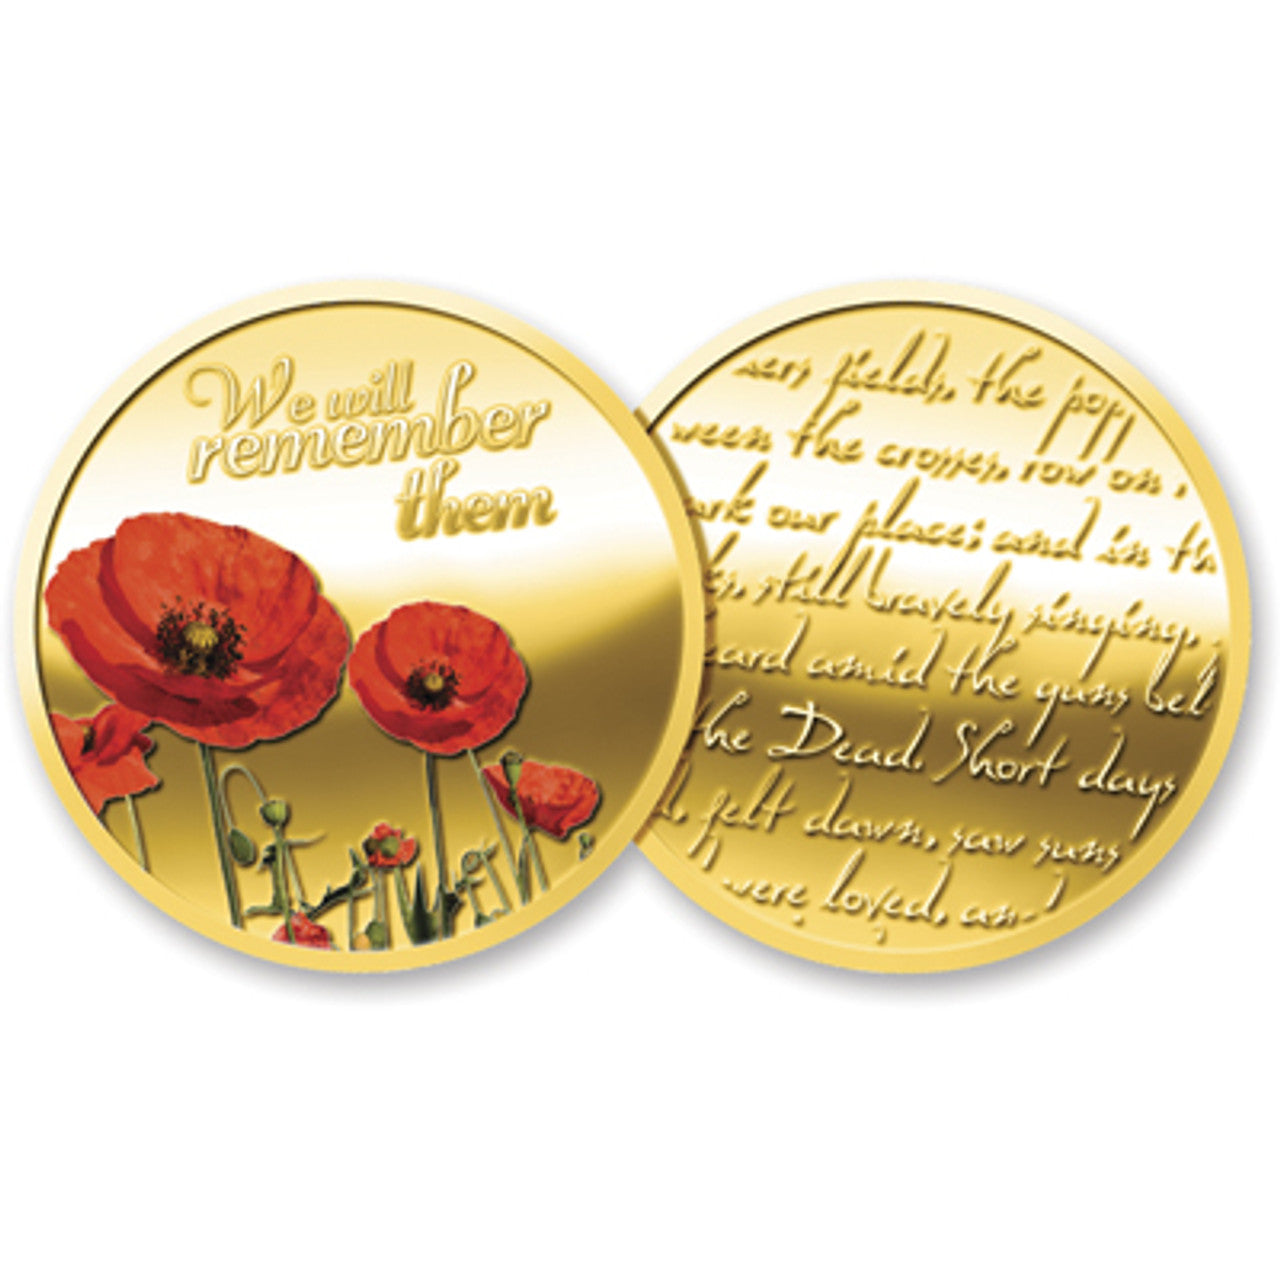 Adorn yourself or a loved one with the beautiful Gold Plated Poppy Medallion In Gift Box. This exquisite medallion is graced with a breathtaking image of the iconic Flanders Poppies, and on the reverse, the immortal poem In Flanders Fields. The medallion comes nestled in a luxurious leatherette presentation box - a perfect gift to cherish for years to come! www.defenceqstore.com.au